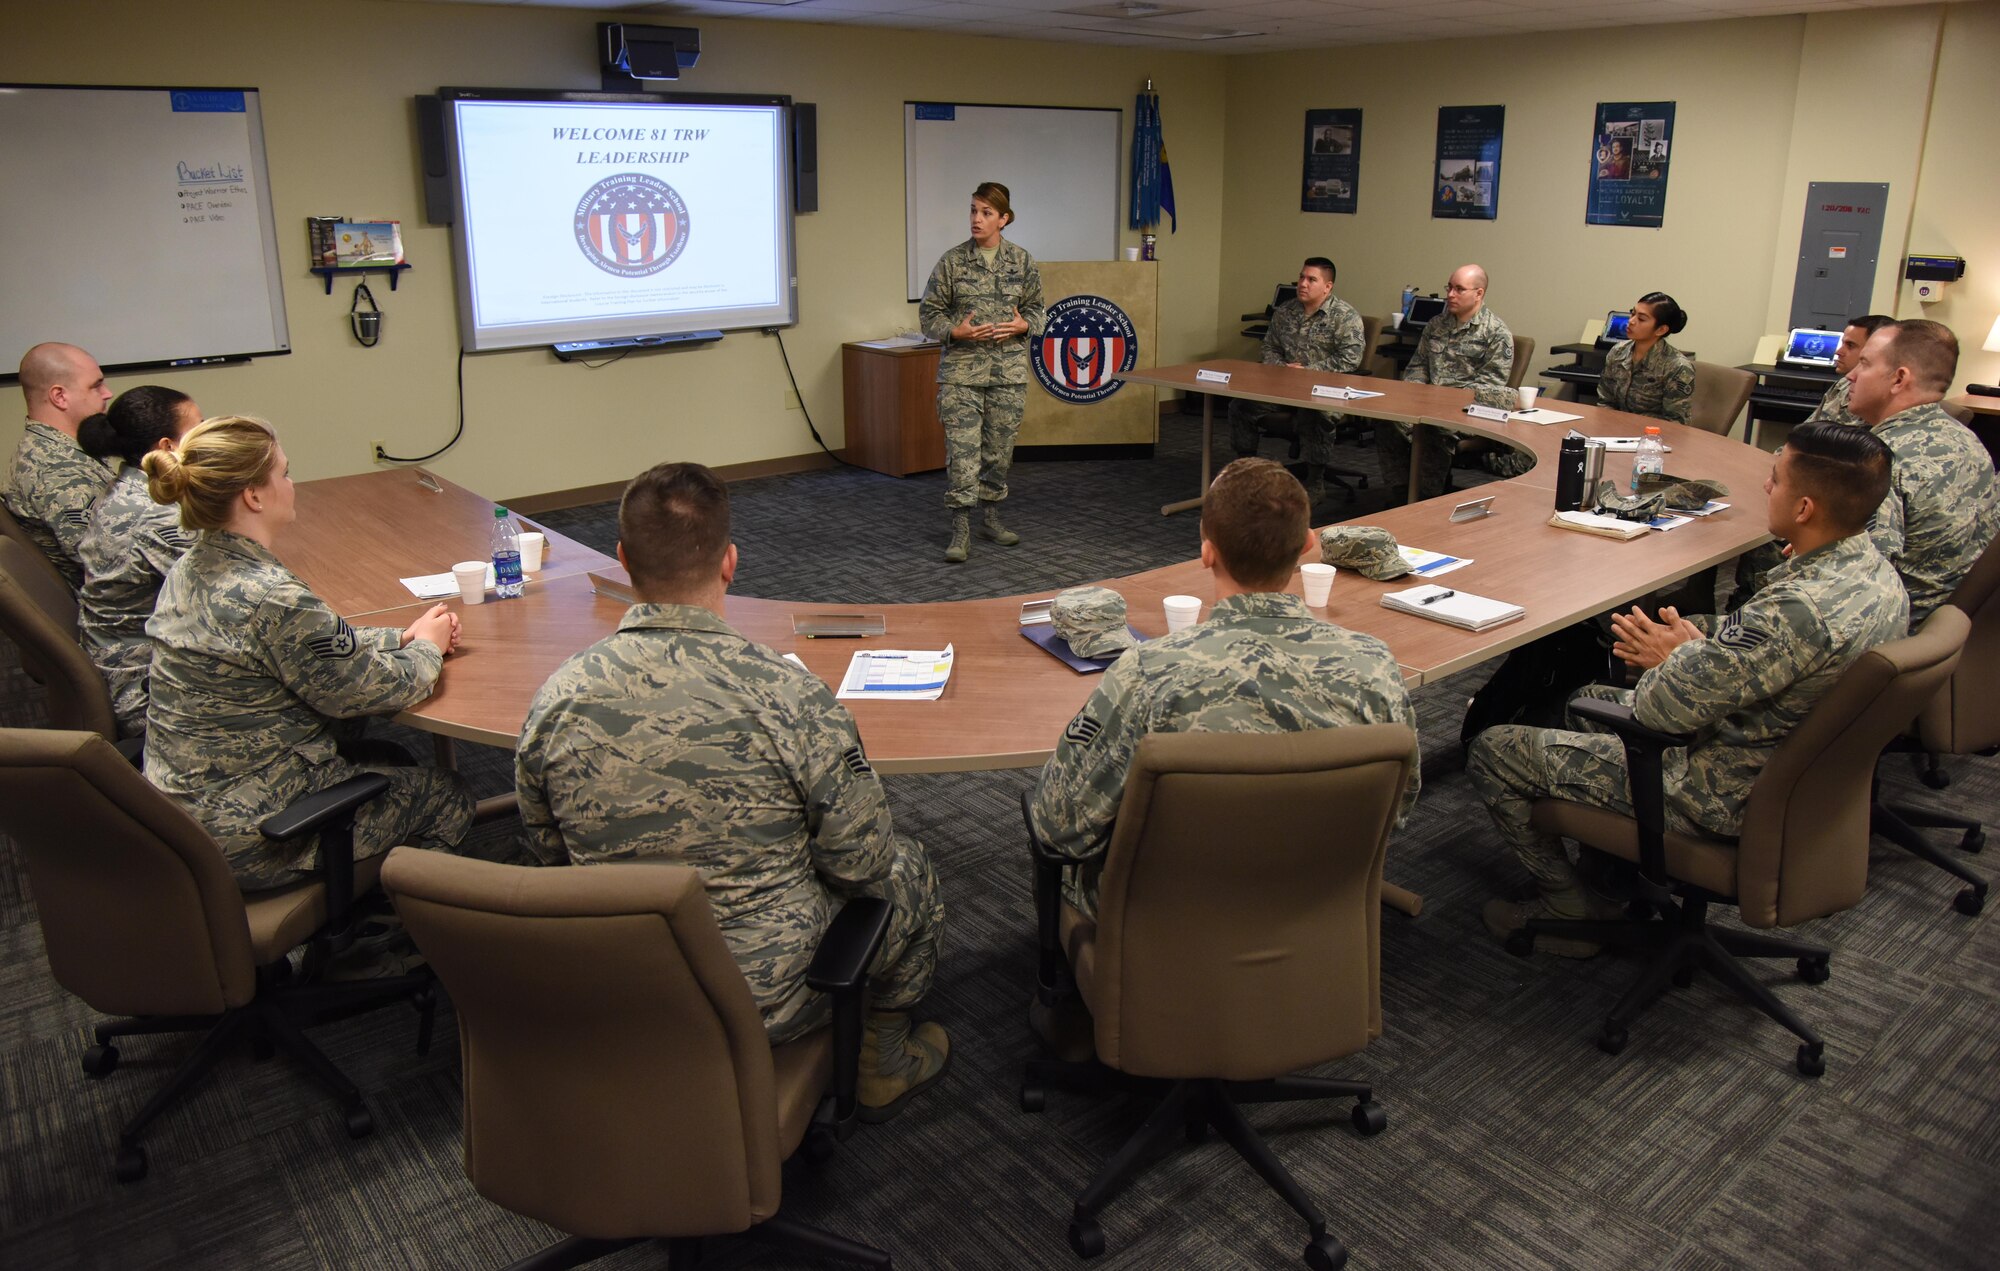 Col. Michele Edmondson, 81st Training Wing commander, delivers welcoming remarks to 81st Training Support Squadron Military Training Leader Course students at Allee Hall Nov. 29, 2016, on Keesler Air Force Base, Miss. This is the second class to attend the schoolhouse’s new four-week course curriculum, which was upped from two weeks and boasts a higher level of hands-on, practical application than its previous format. (U.S. Air Force photo by Kemberly Groue)